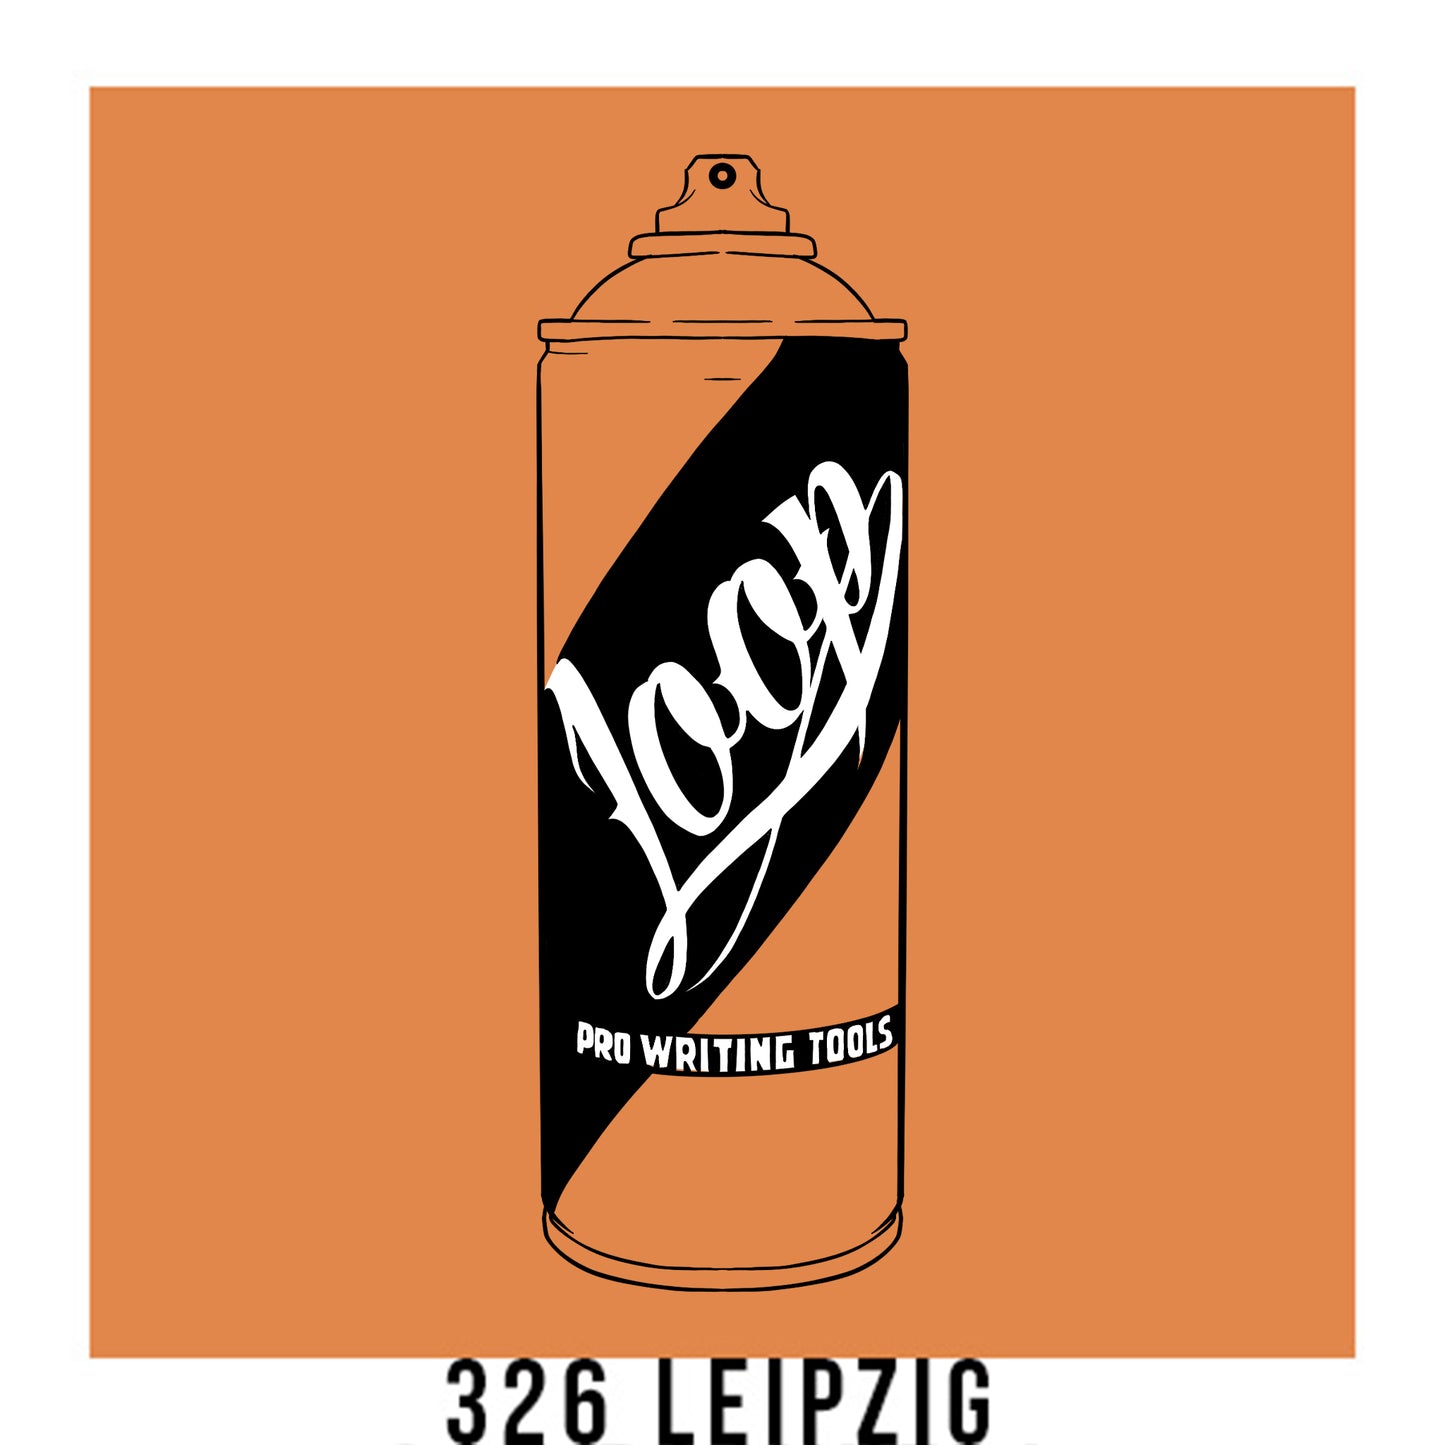 A black outline drawing of a cream orange spray paint can with the word "Loop" written on the face in script. The background is a color swatch of the same cream orange with a white border with the words "326 Leipzig" at the bottom.